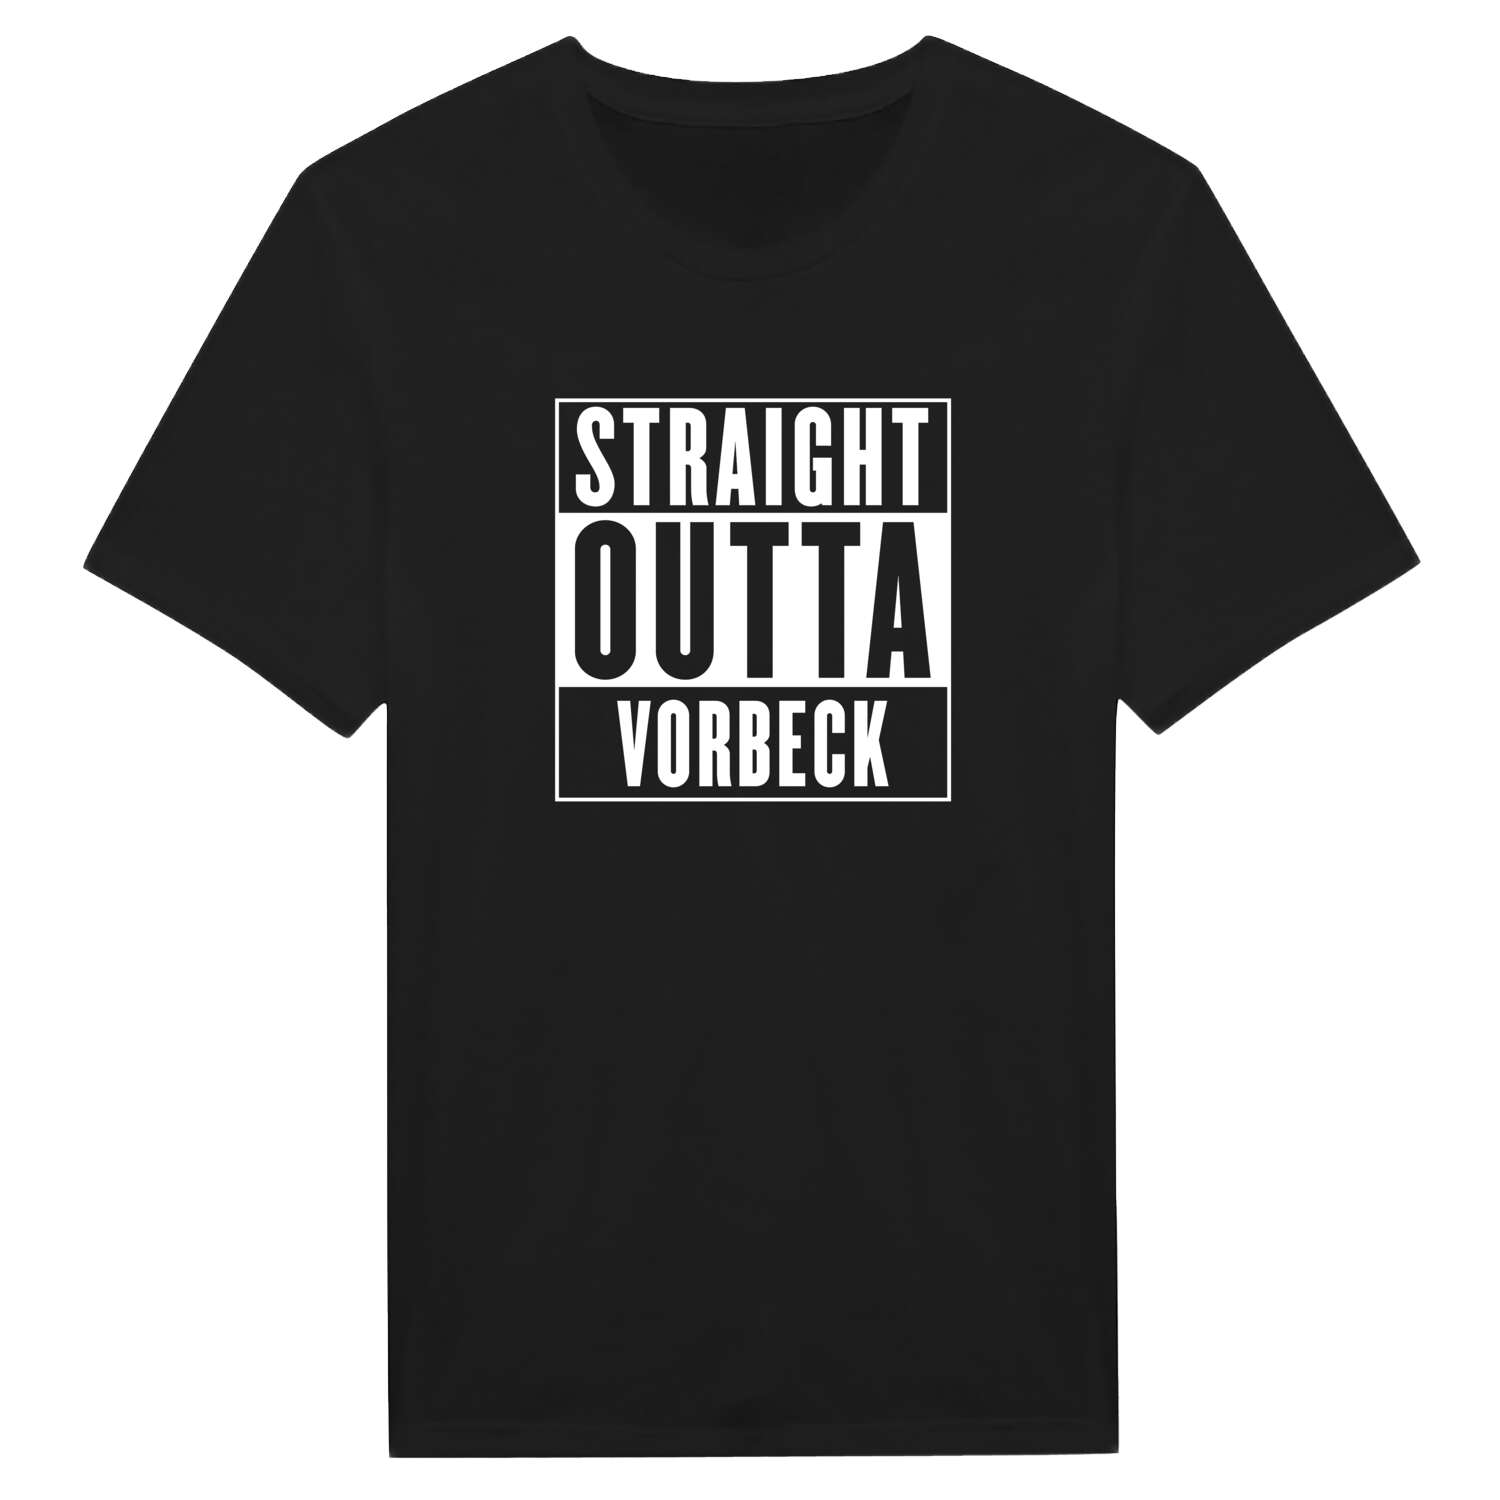 Vorbeck T-Shirt »Straight Outta«